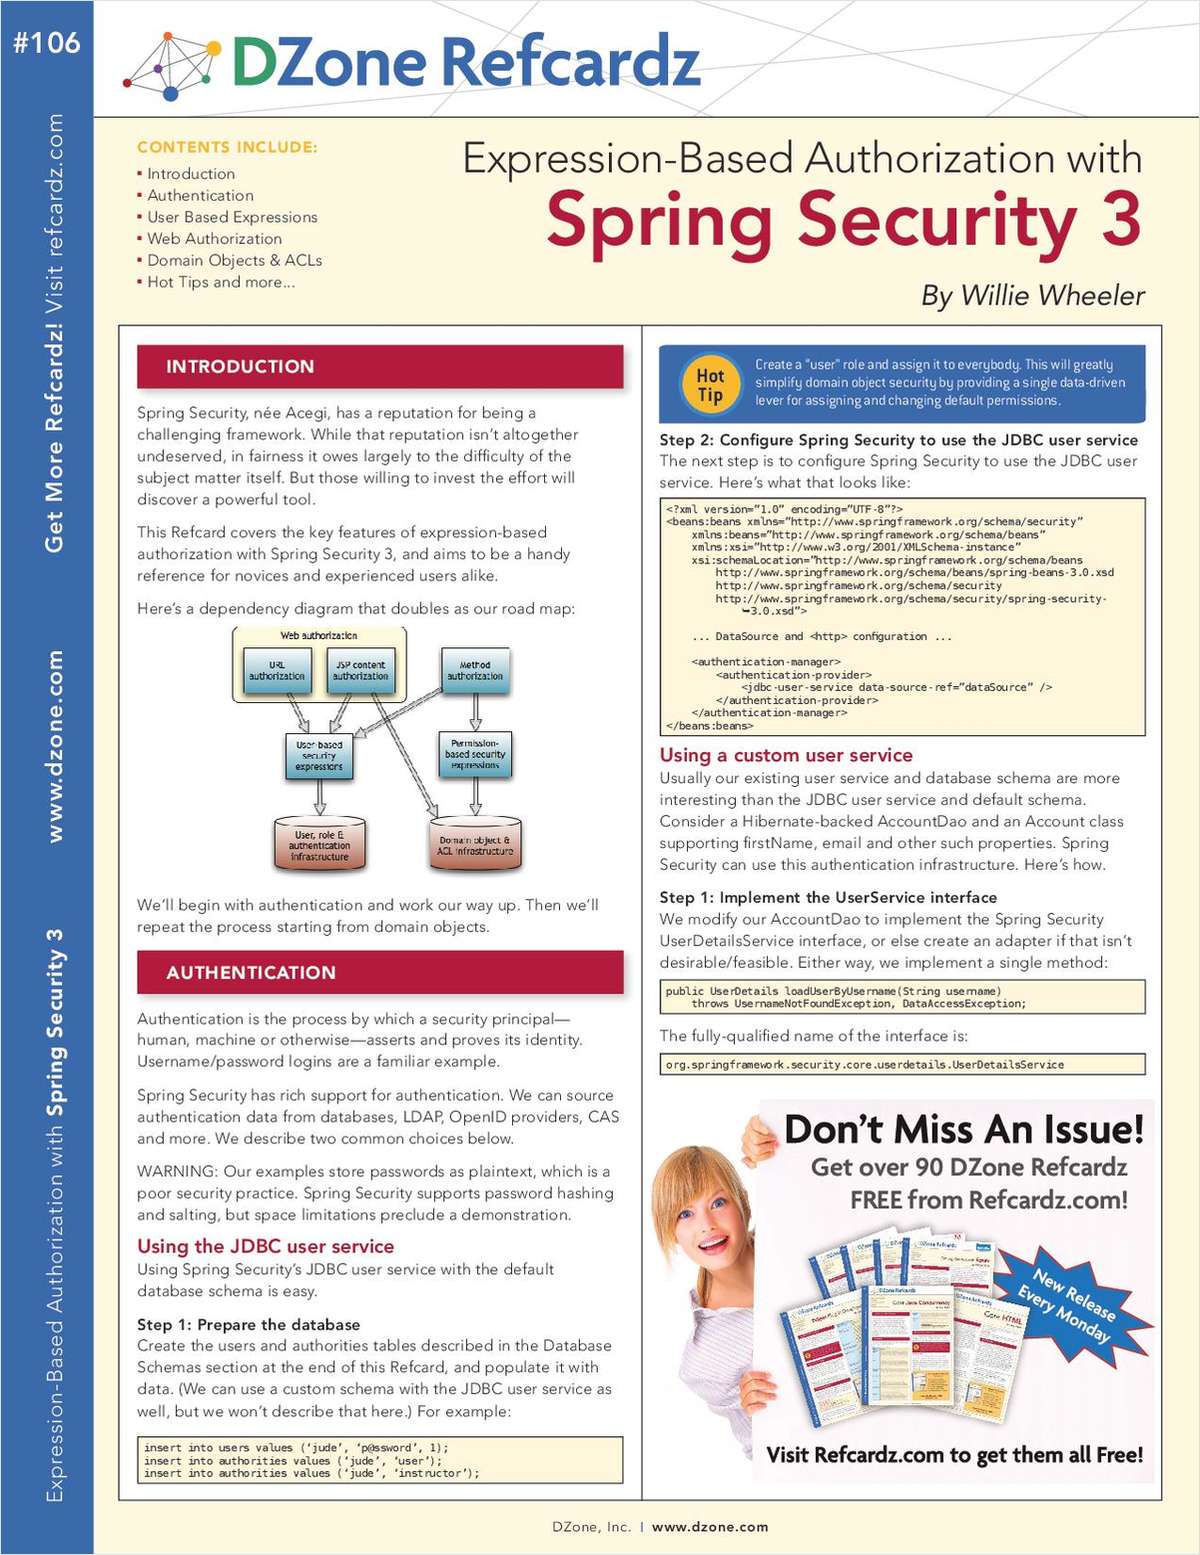 Expression-Based Authorization with Spring Security 3